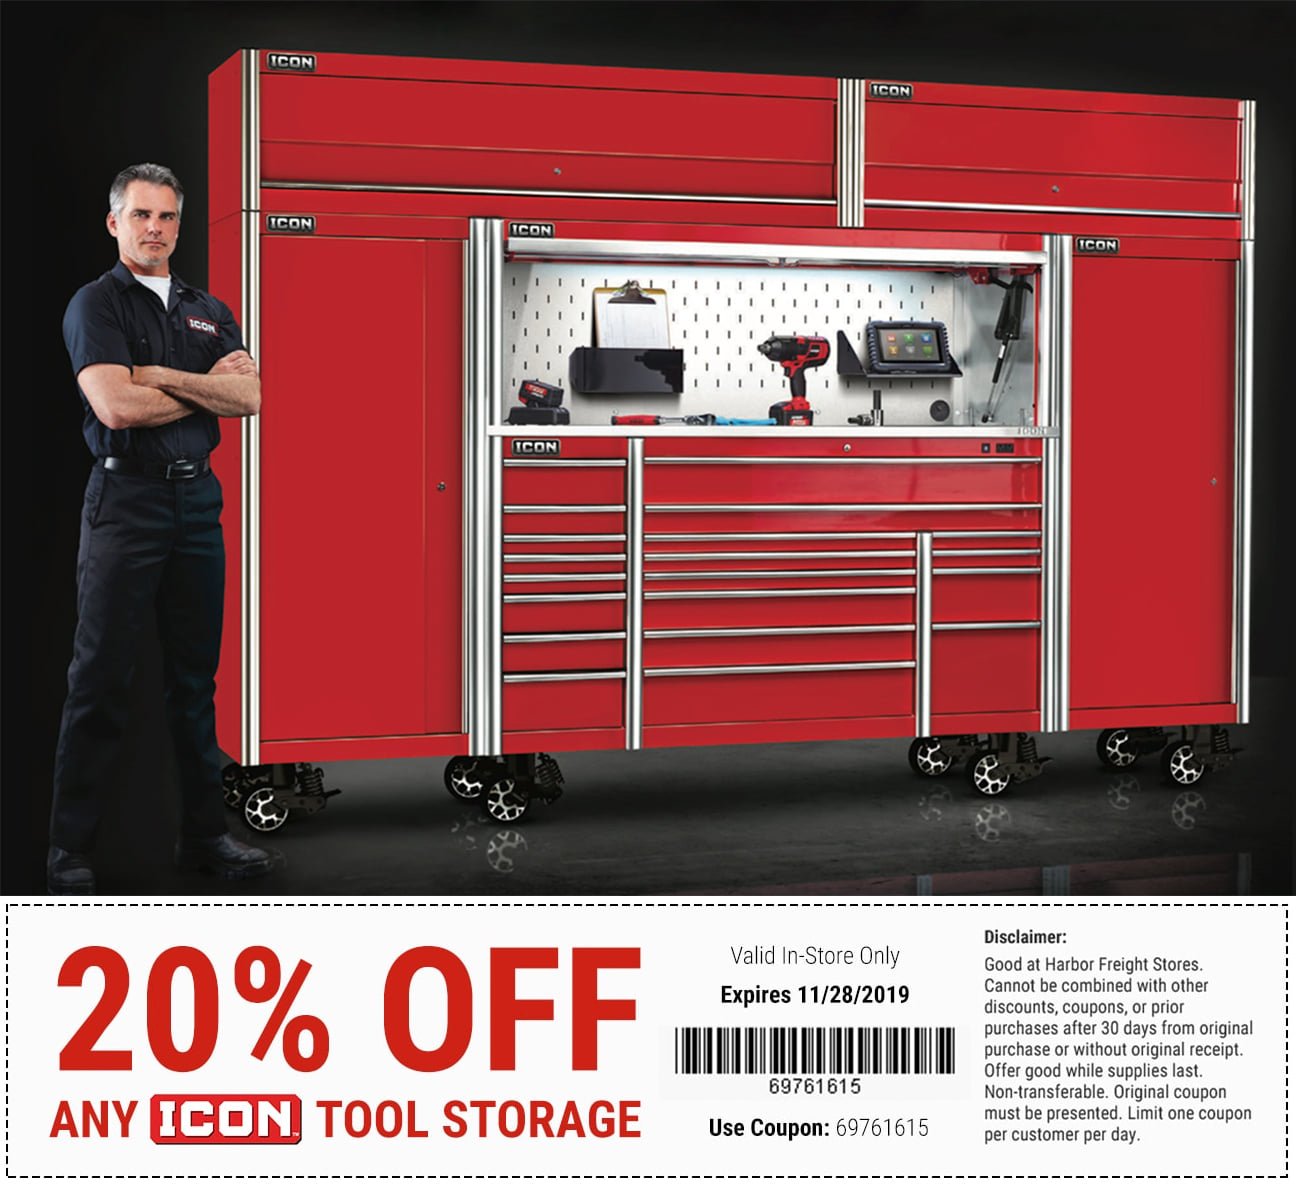 Harbor Freight Tools Tool Truck Quality Unbeatable Prices Experience Our New Line Of Icon Tools And Storage At A Harbor Freight Location Near You And Save Off Any Icon